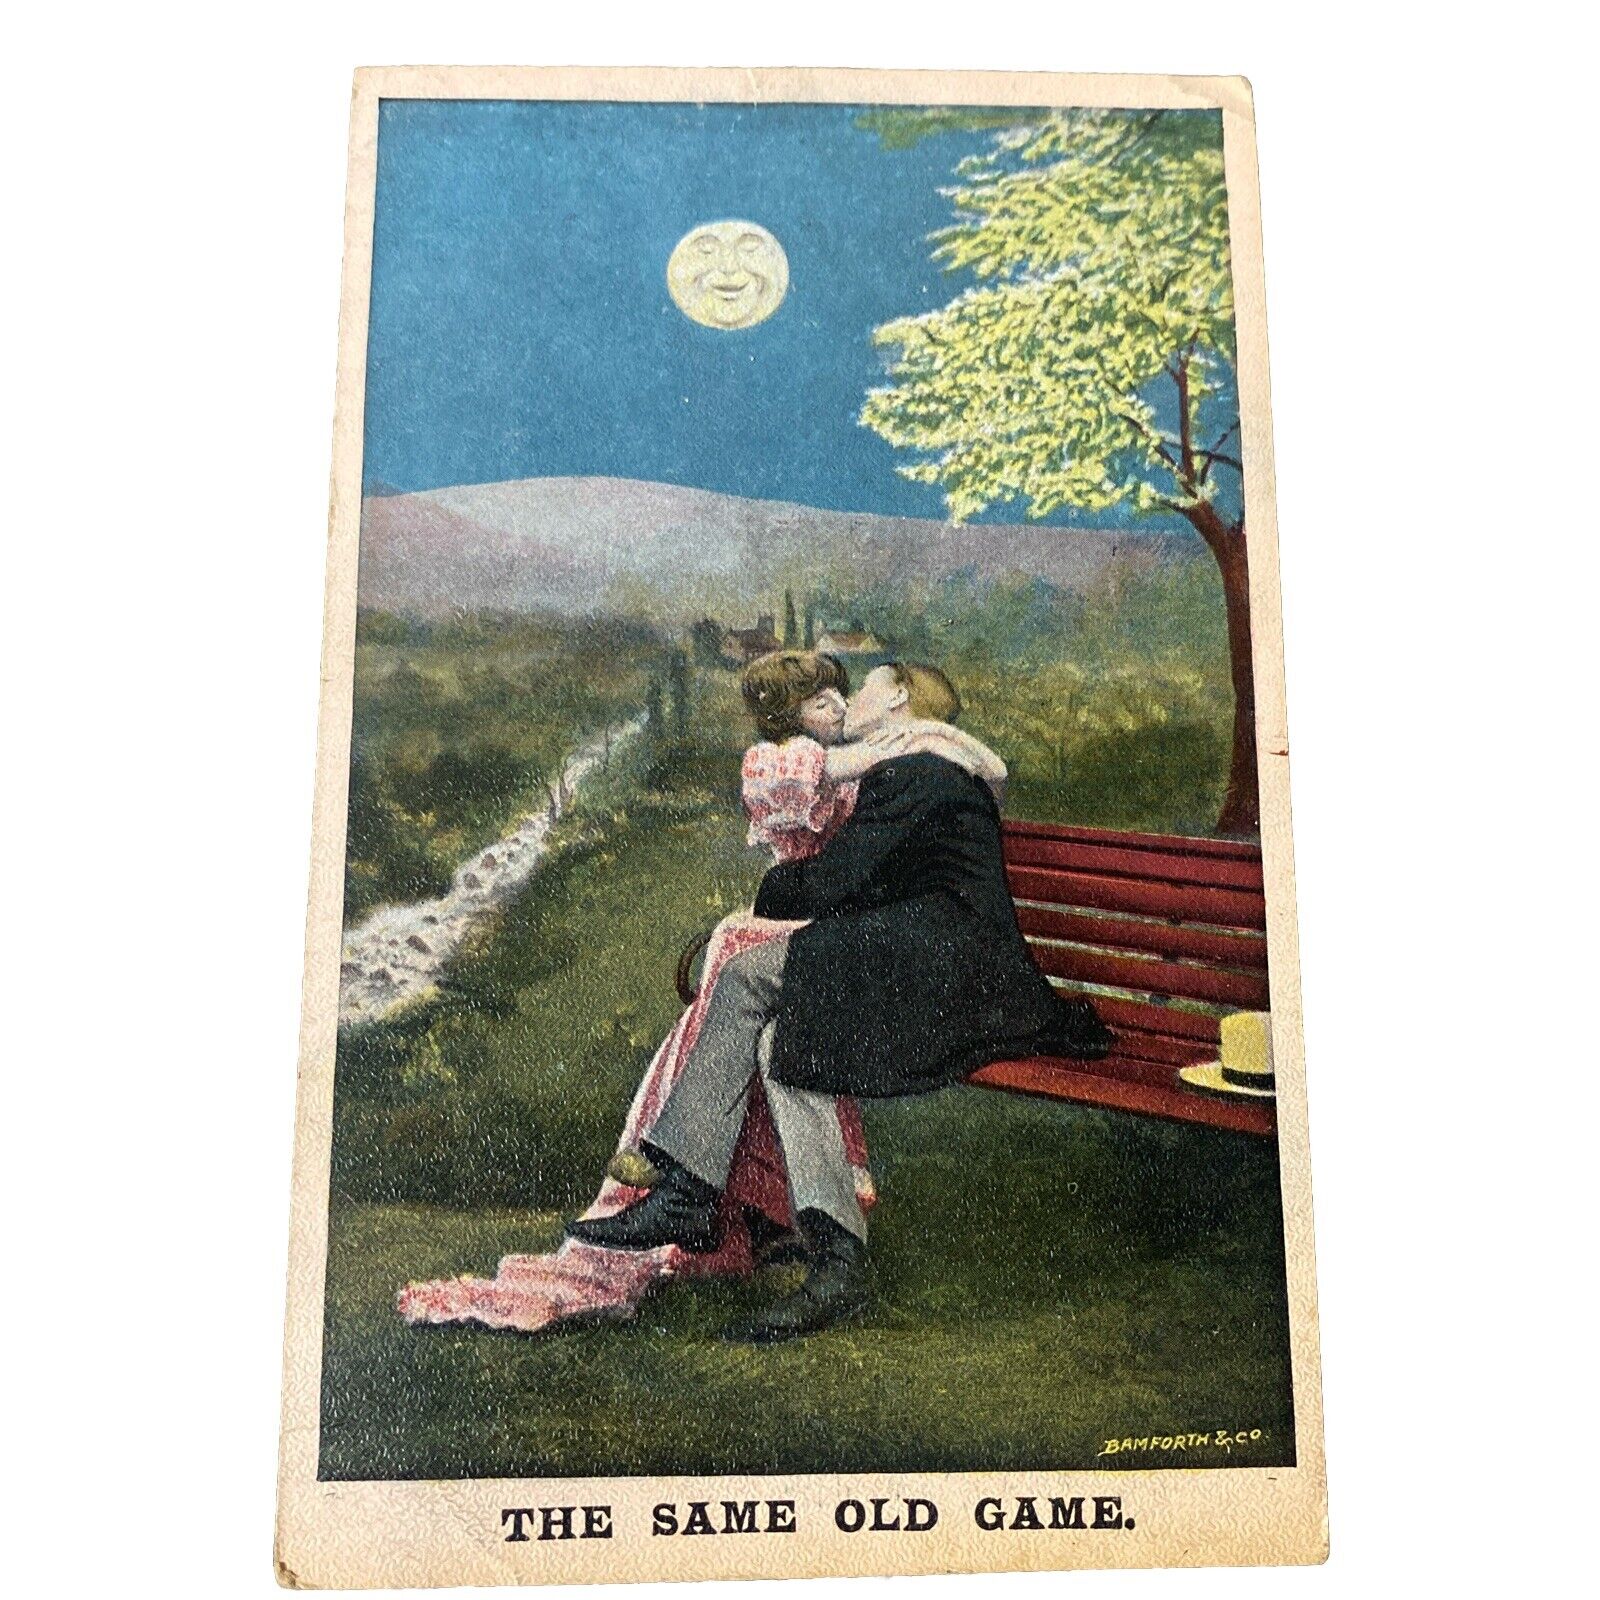 Postcard Romance Couple Kissing on Bench Same old game 1908 Vintage Connecticut